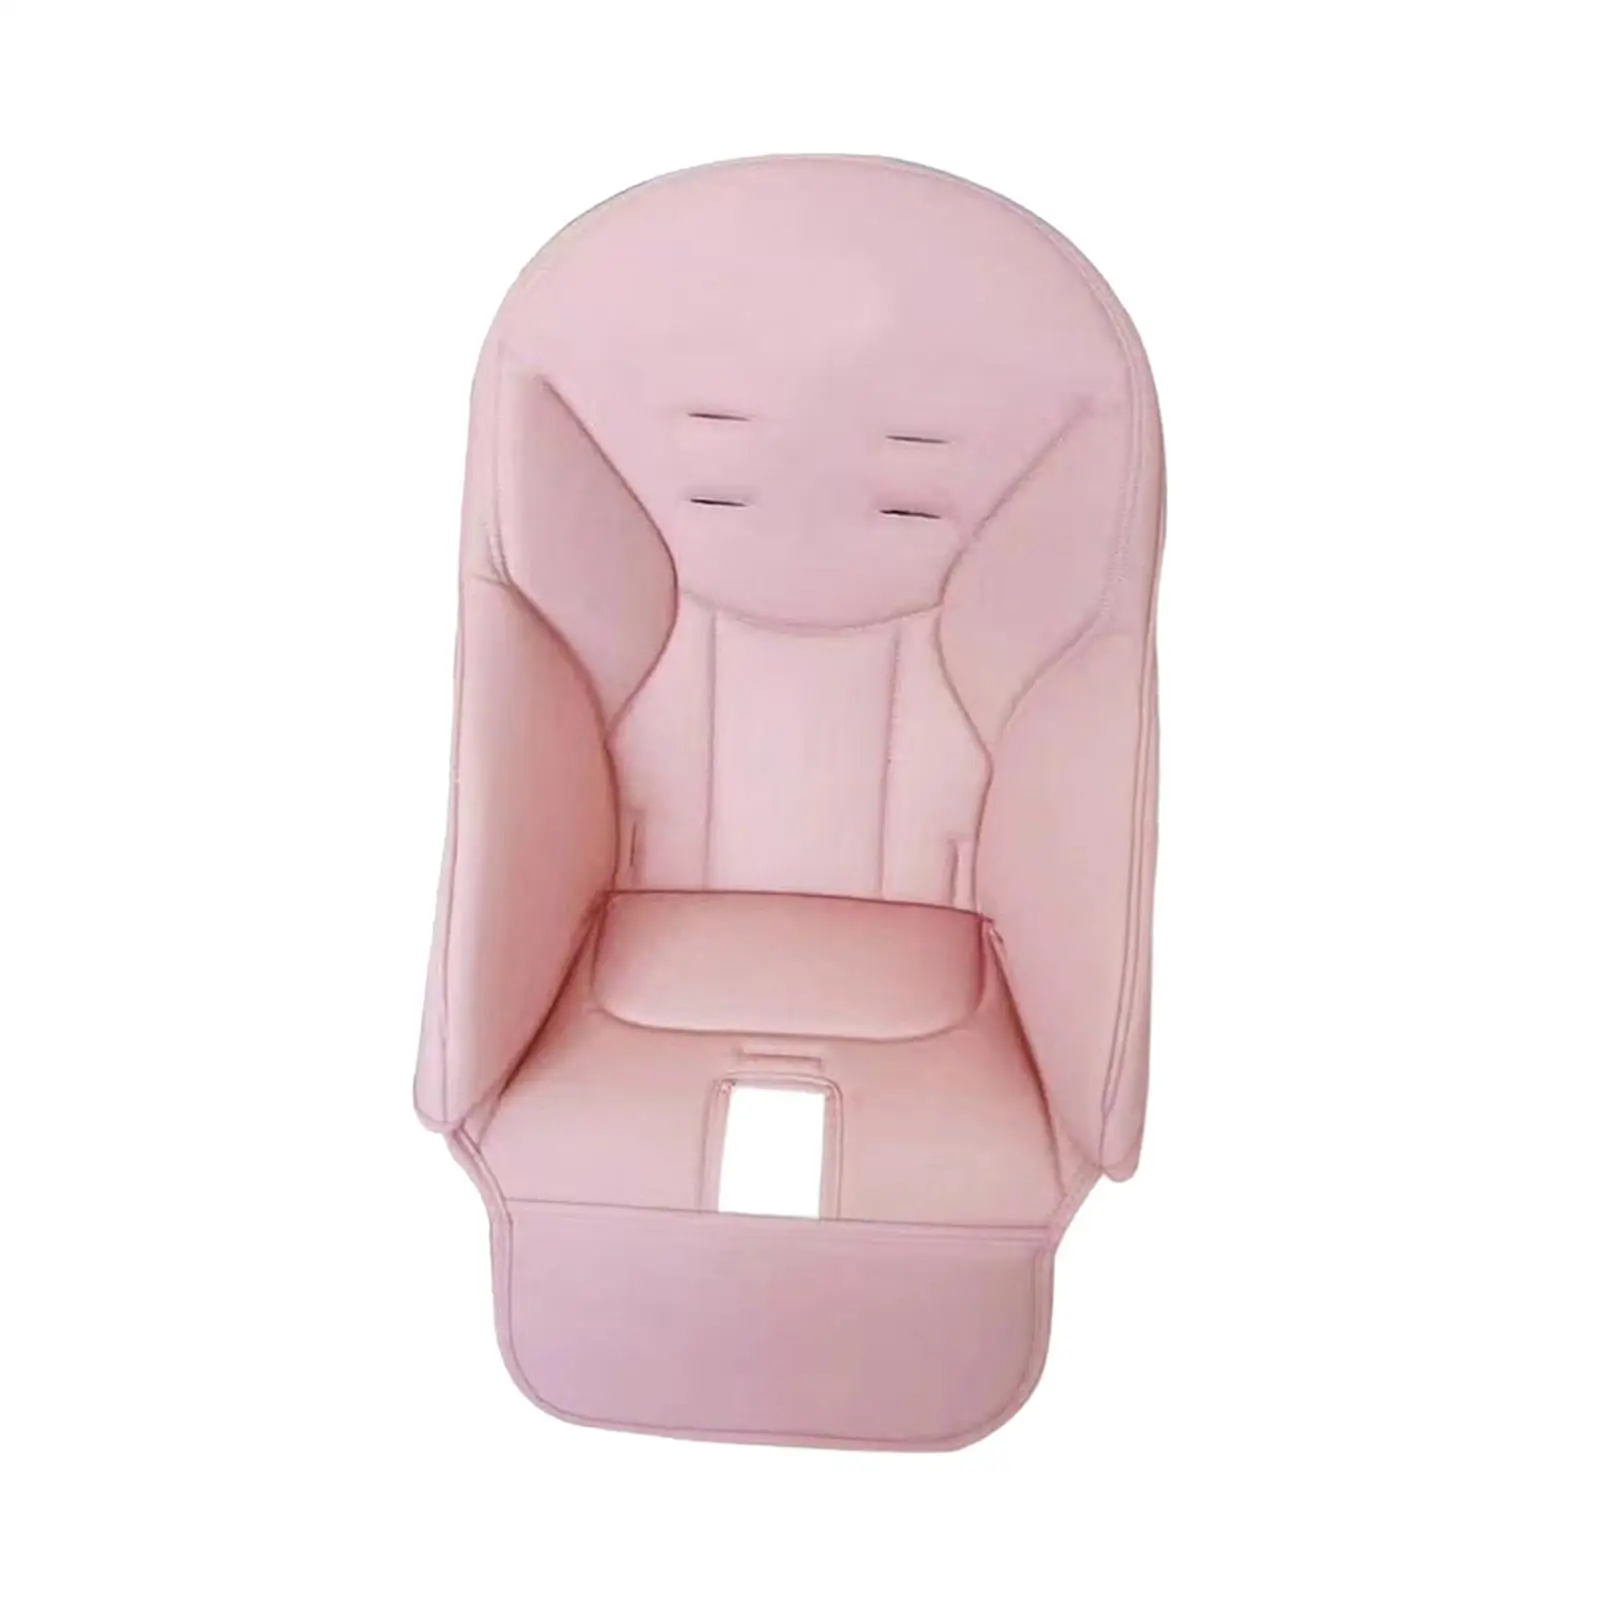 Baby Dining Chair Cover Kid Baby Stable Seat Pad for Children Small Chair